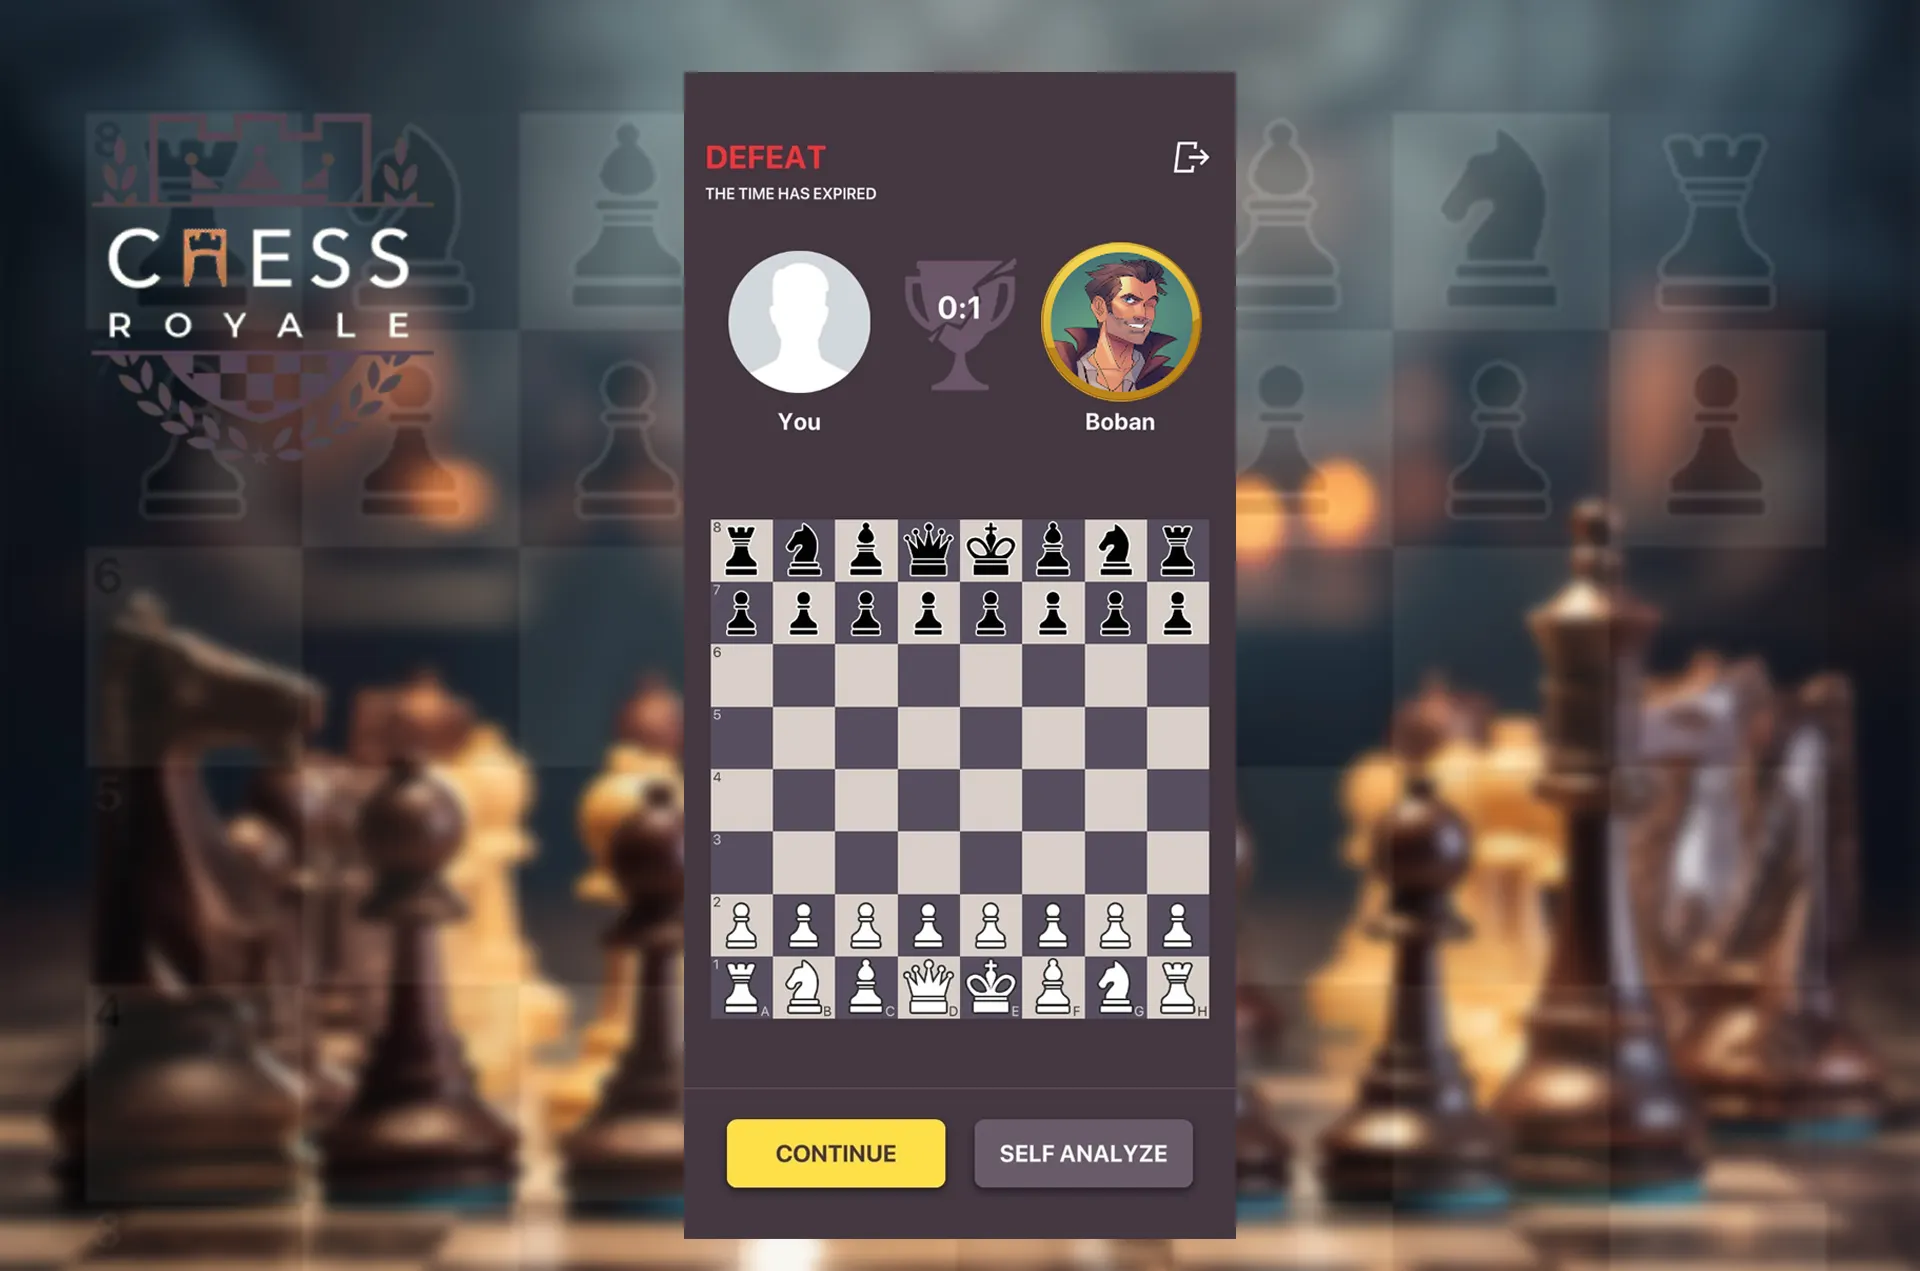 Find The World of Chess Royale